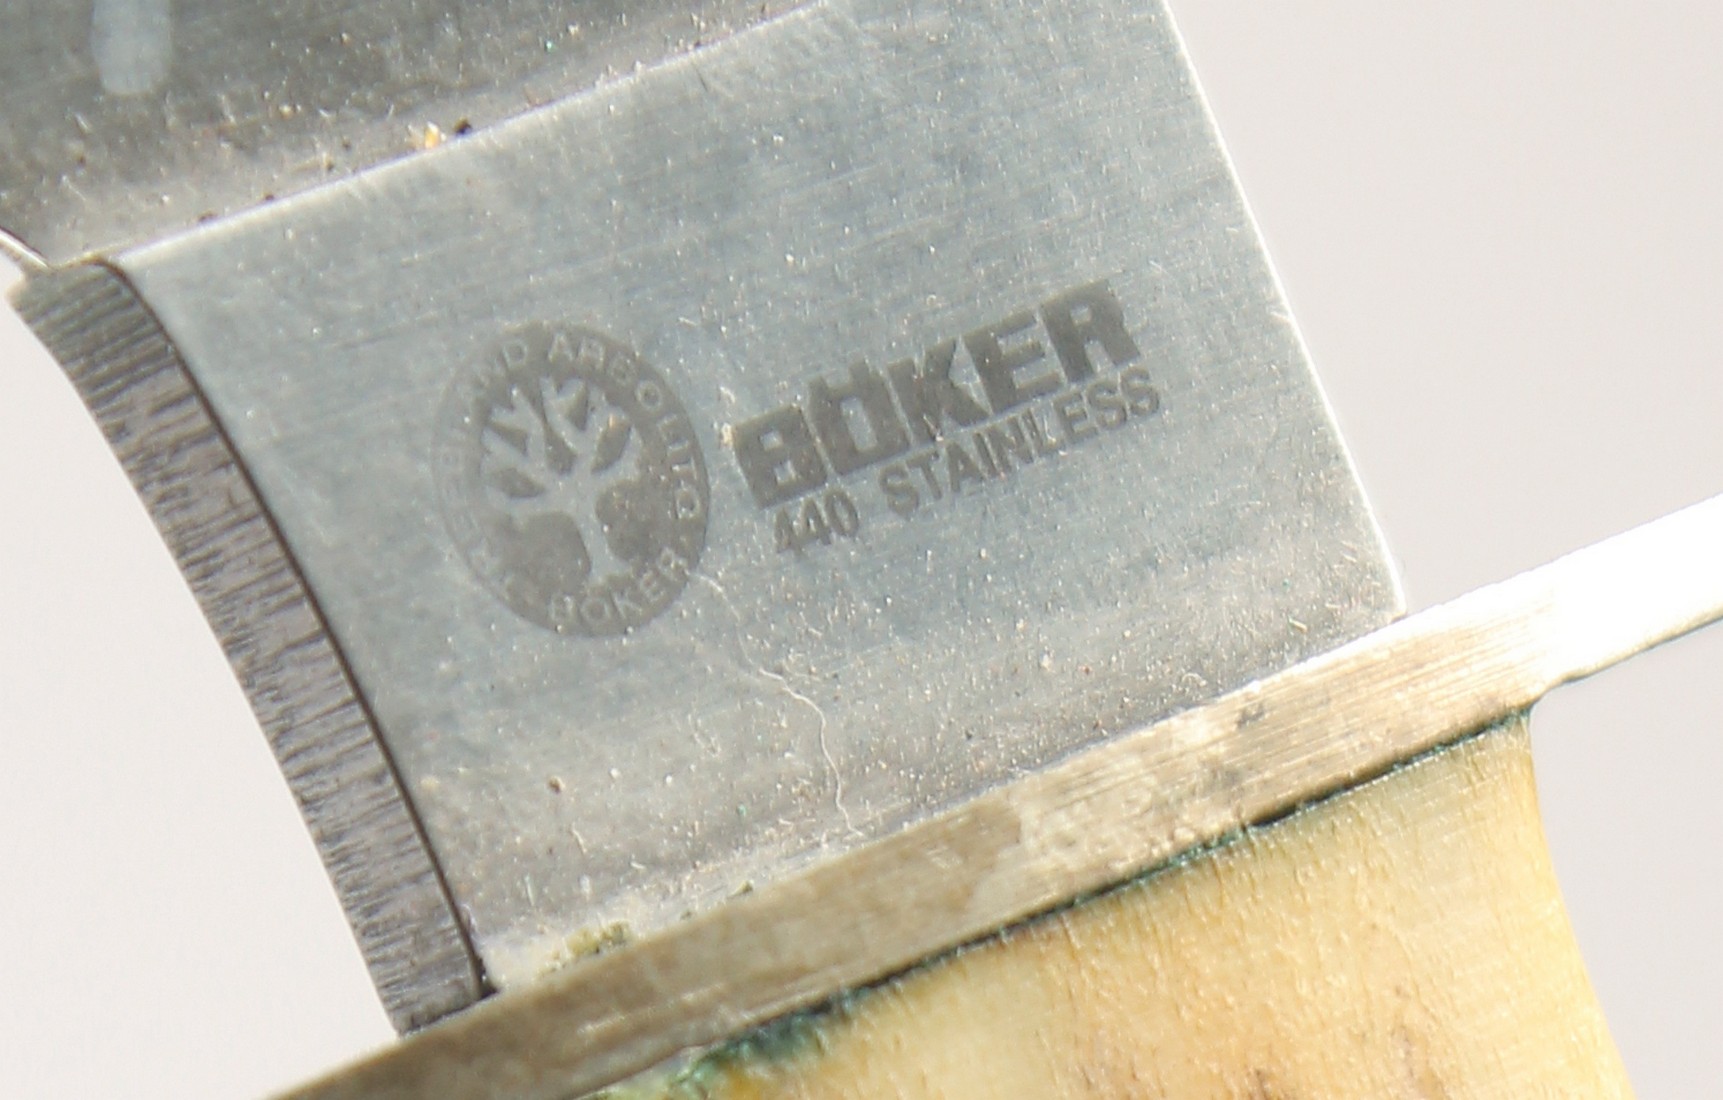 A TREE BRAND BOXER 440 STAINLESS STEEL KNIFE, with antler handle, 10" long. - Image 4 of 4